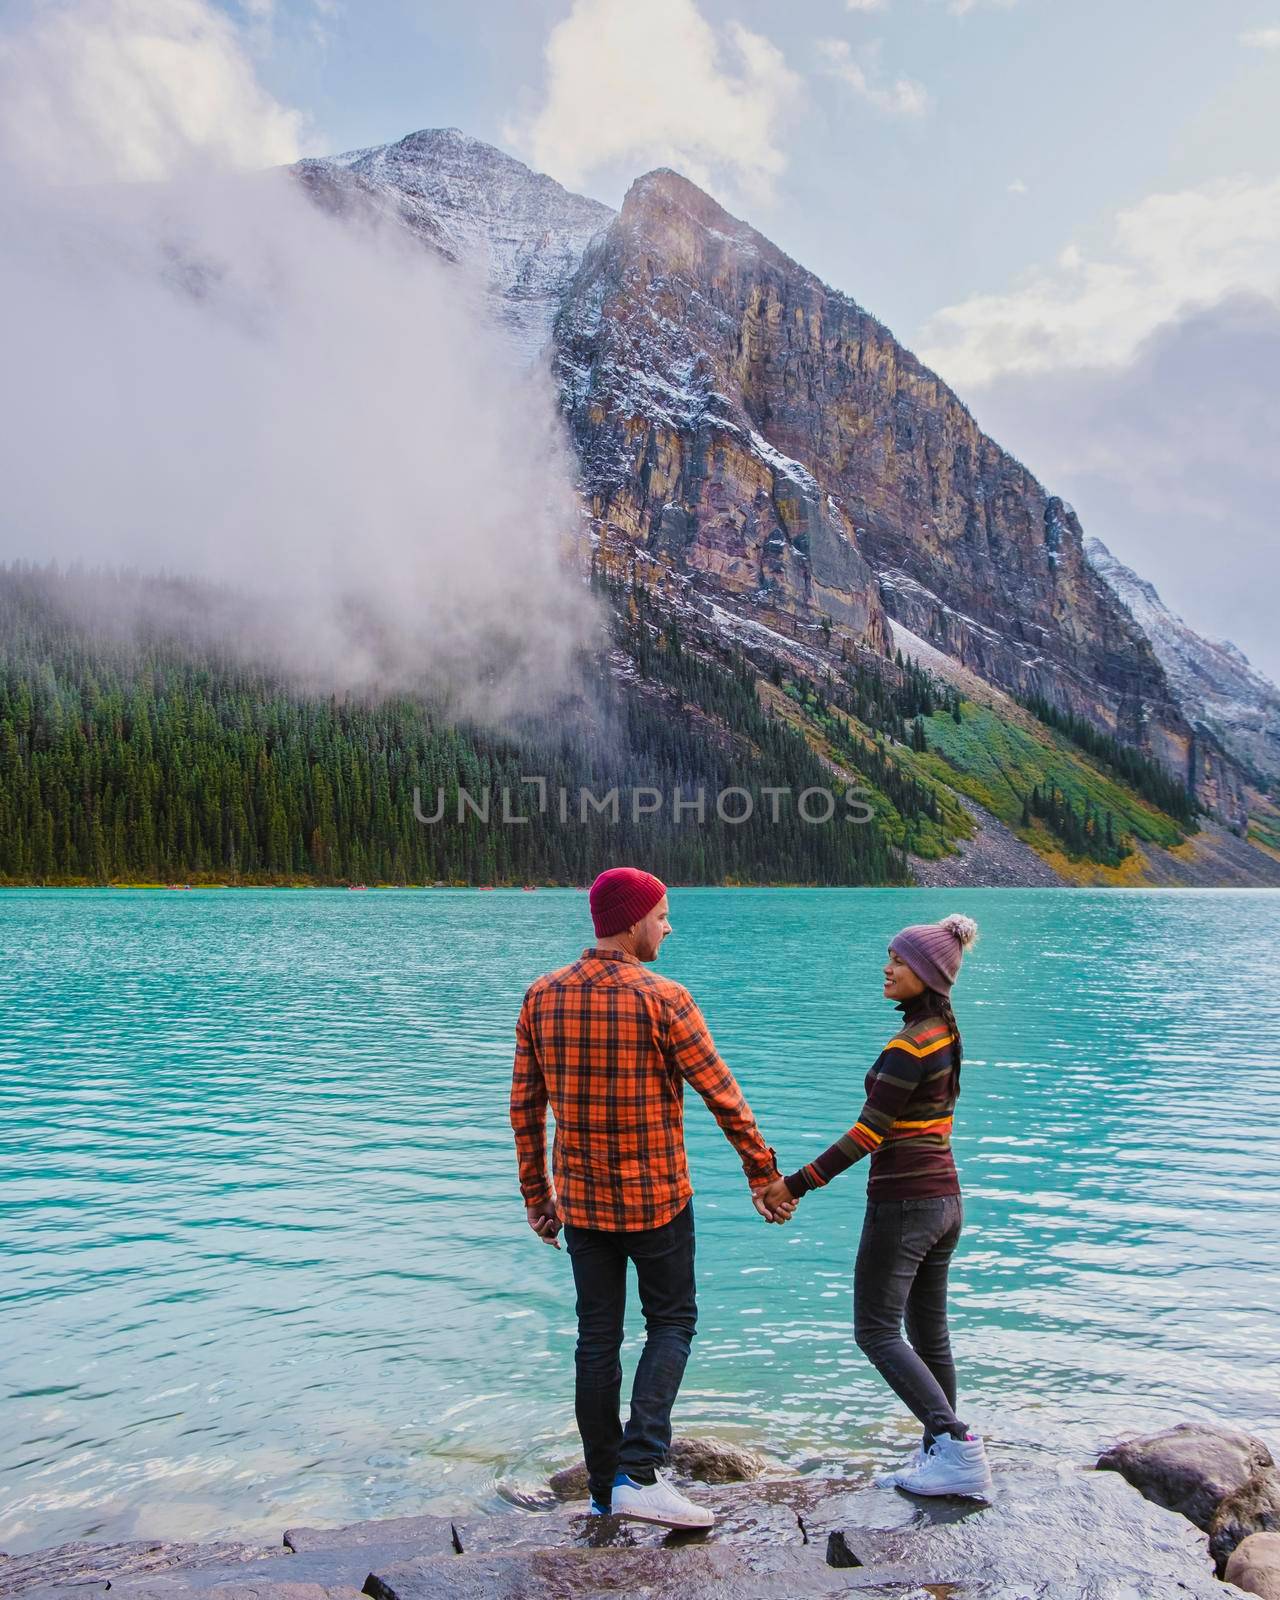 Lake Louise Banff national park, is a lake in the Canadian Rocky Mountains. A young couple of men and women standing by the lake during a cold day in Autumn in Canada